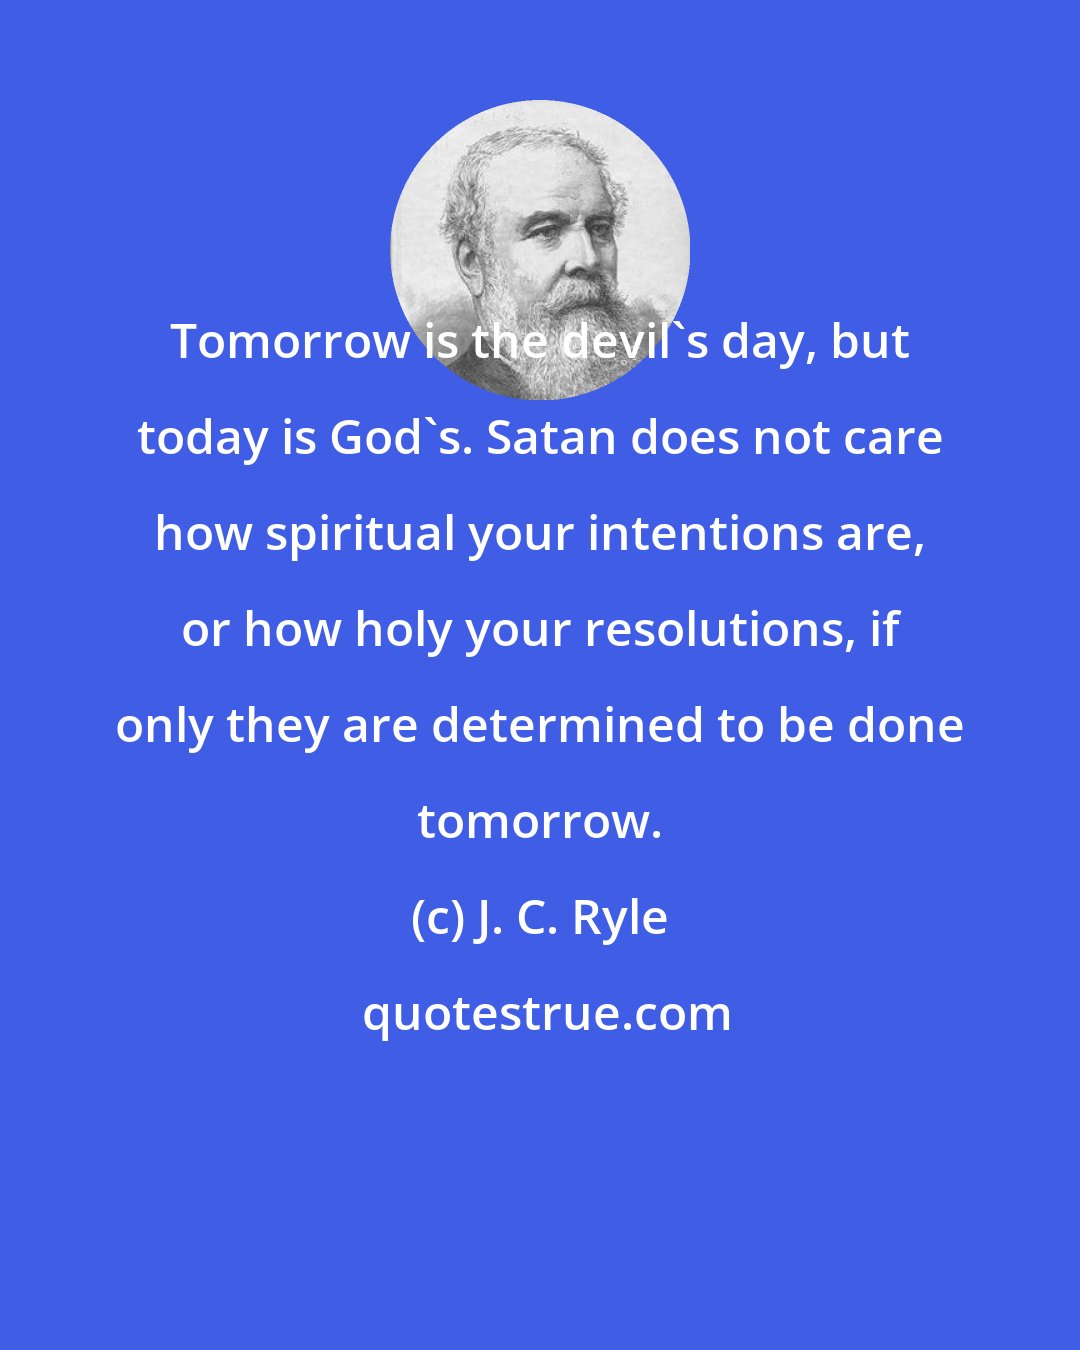 J. C. Ryle: Tomorrow is the devil's day, but today is God's. Satan does not care how spiritual your intentions are, or how holy your resolutions, if only they are determined to be done tomorrow.